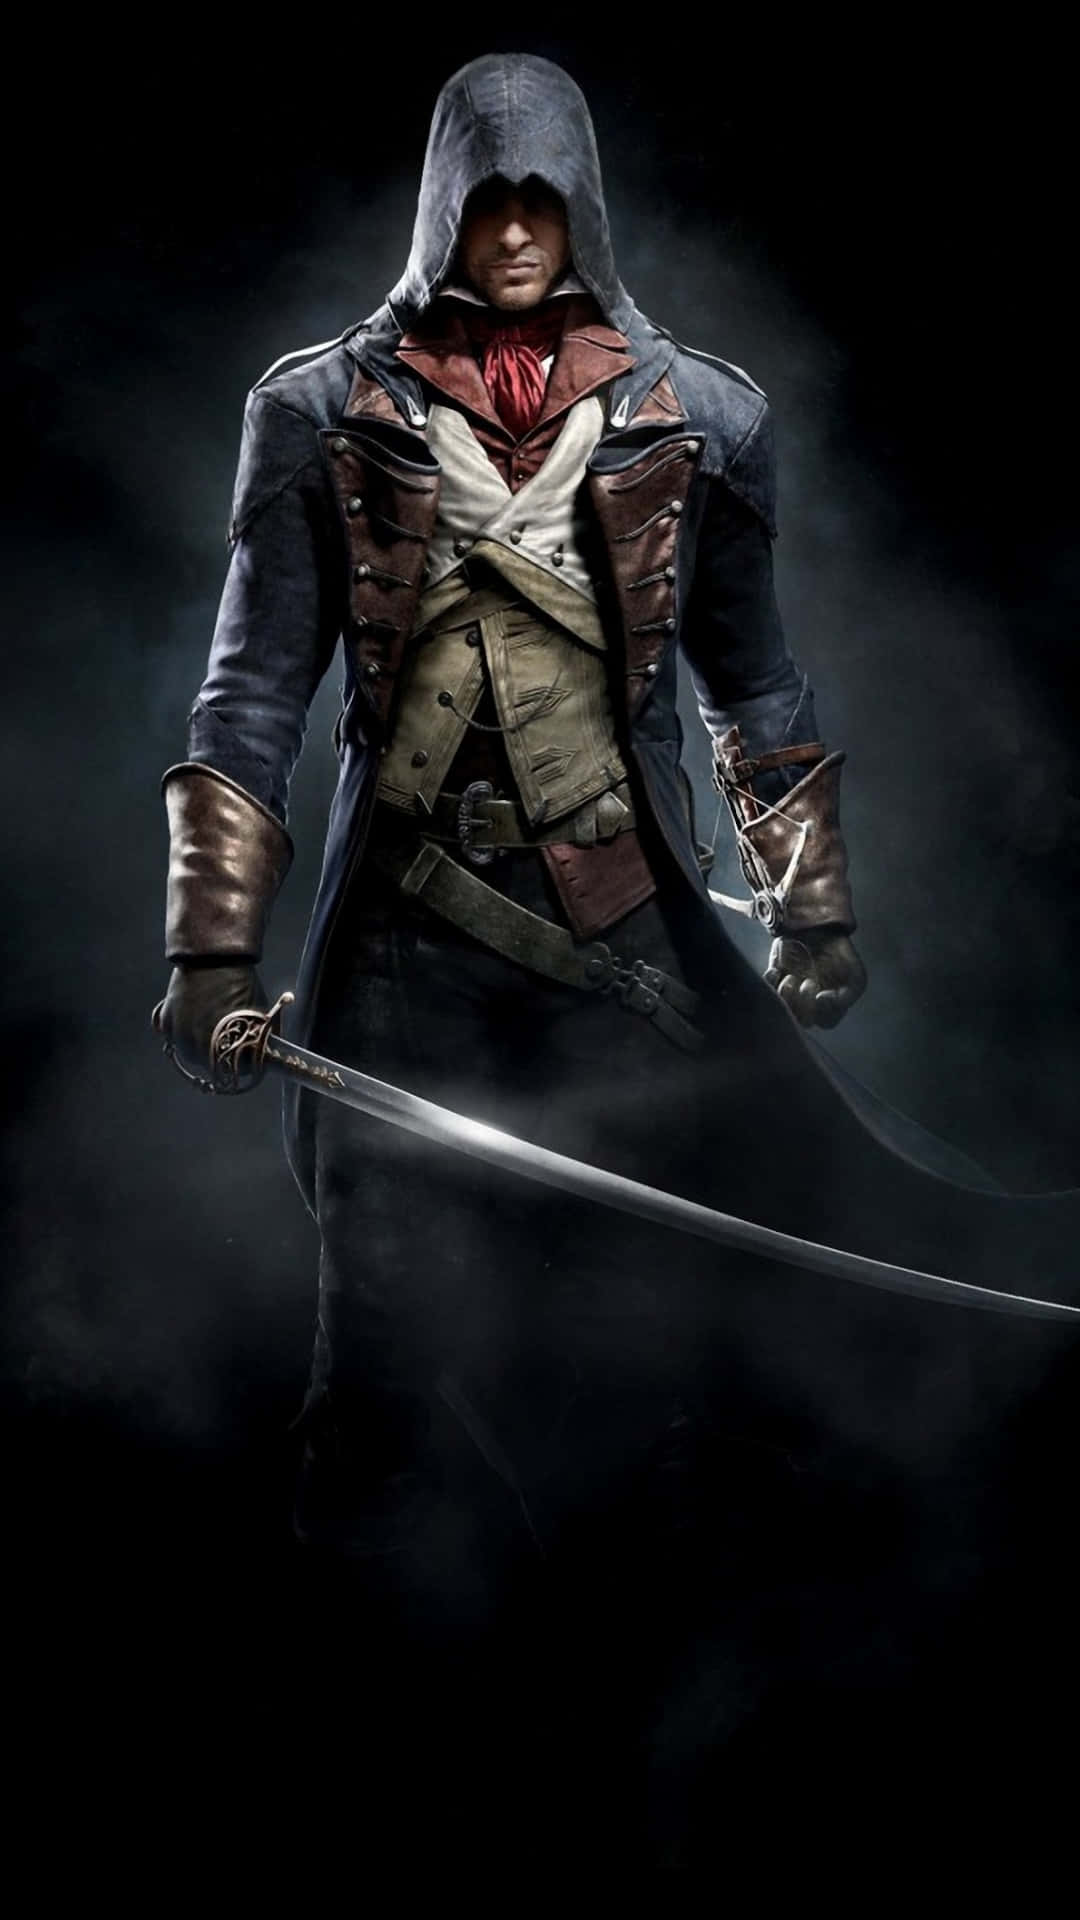 Experience The Assassins Creed World On Your Iphone Background